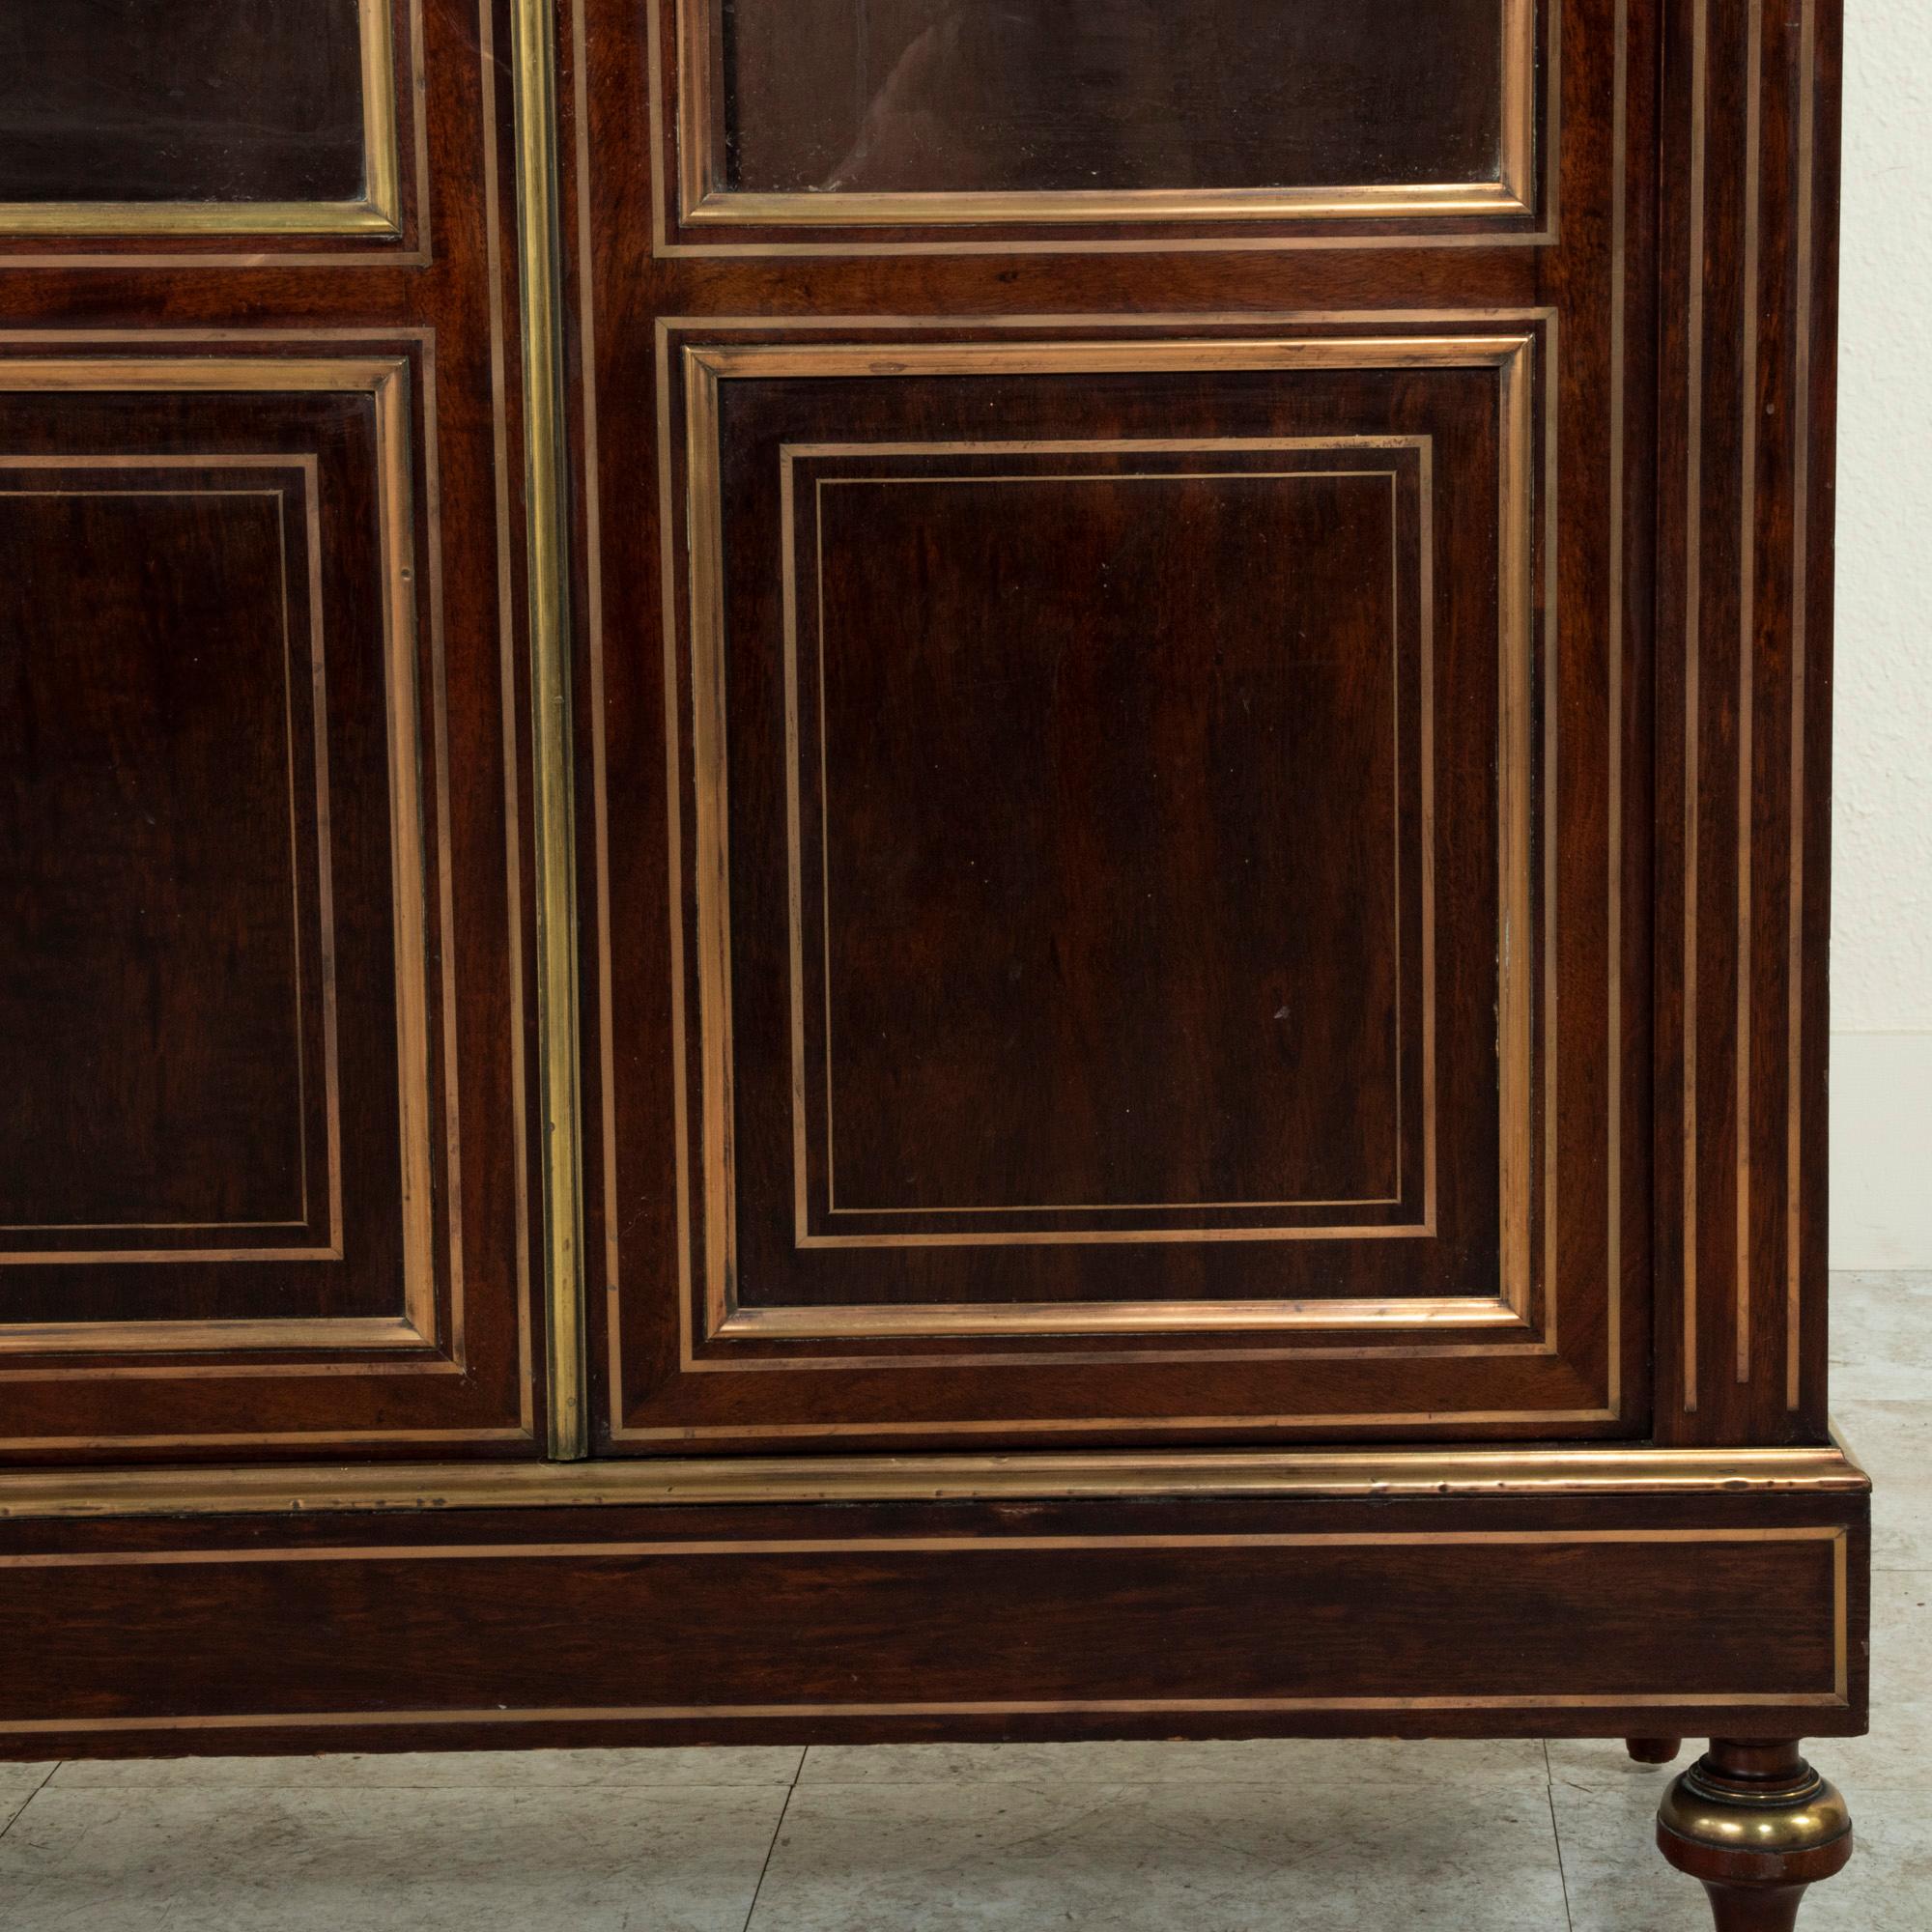 Standing at 63 inches in height, this small scale mid-nineteenth century Louis XVI style mahogany bibliotheque or bookcase is finished with stunning bronze banding. Its corners feature fluting with inset bronze filets. Both doors have their original